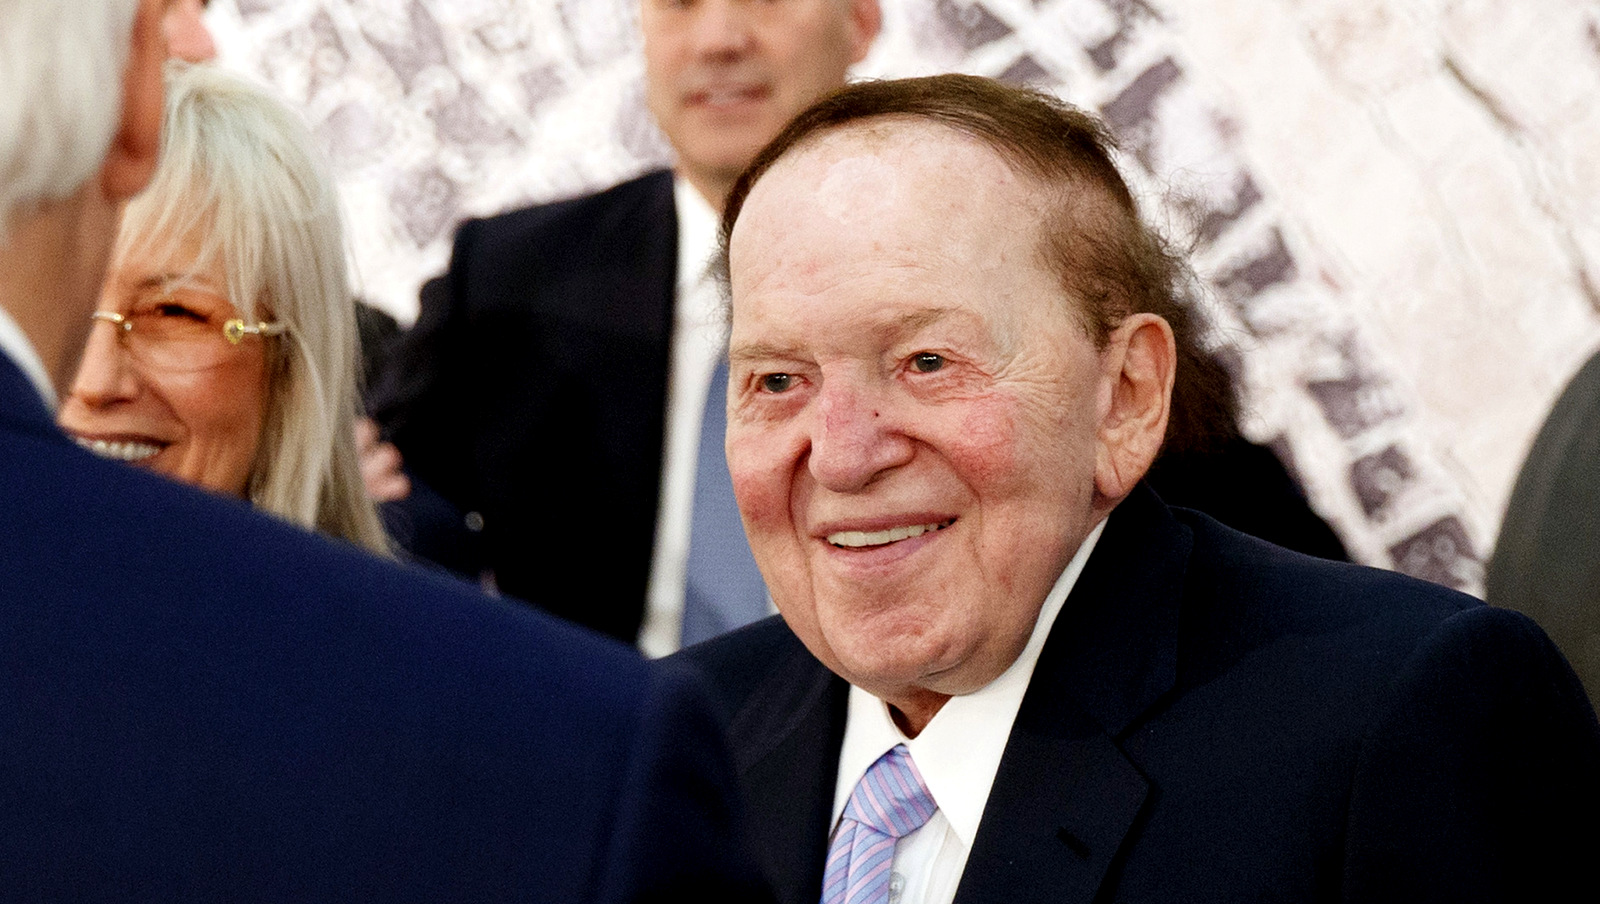 Sheldon Adelson talks with Rex Tillerson, before a speech by President Donald Trump at the Israel Museum in Jerusalem,s May 23, 2017. (AP/Evan Vucci)